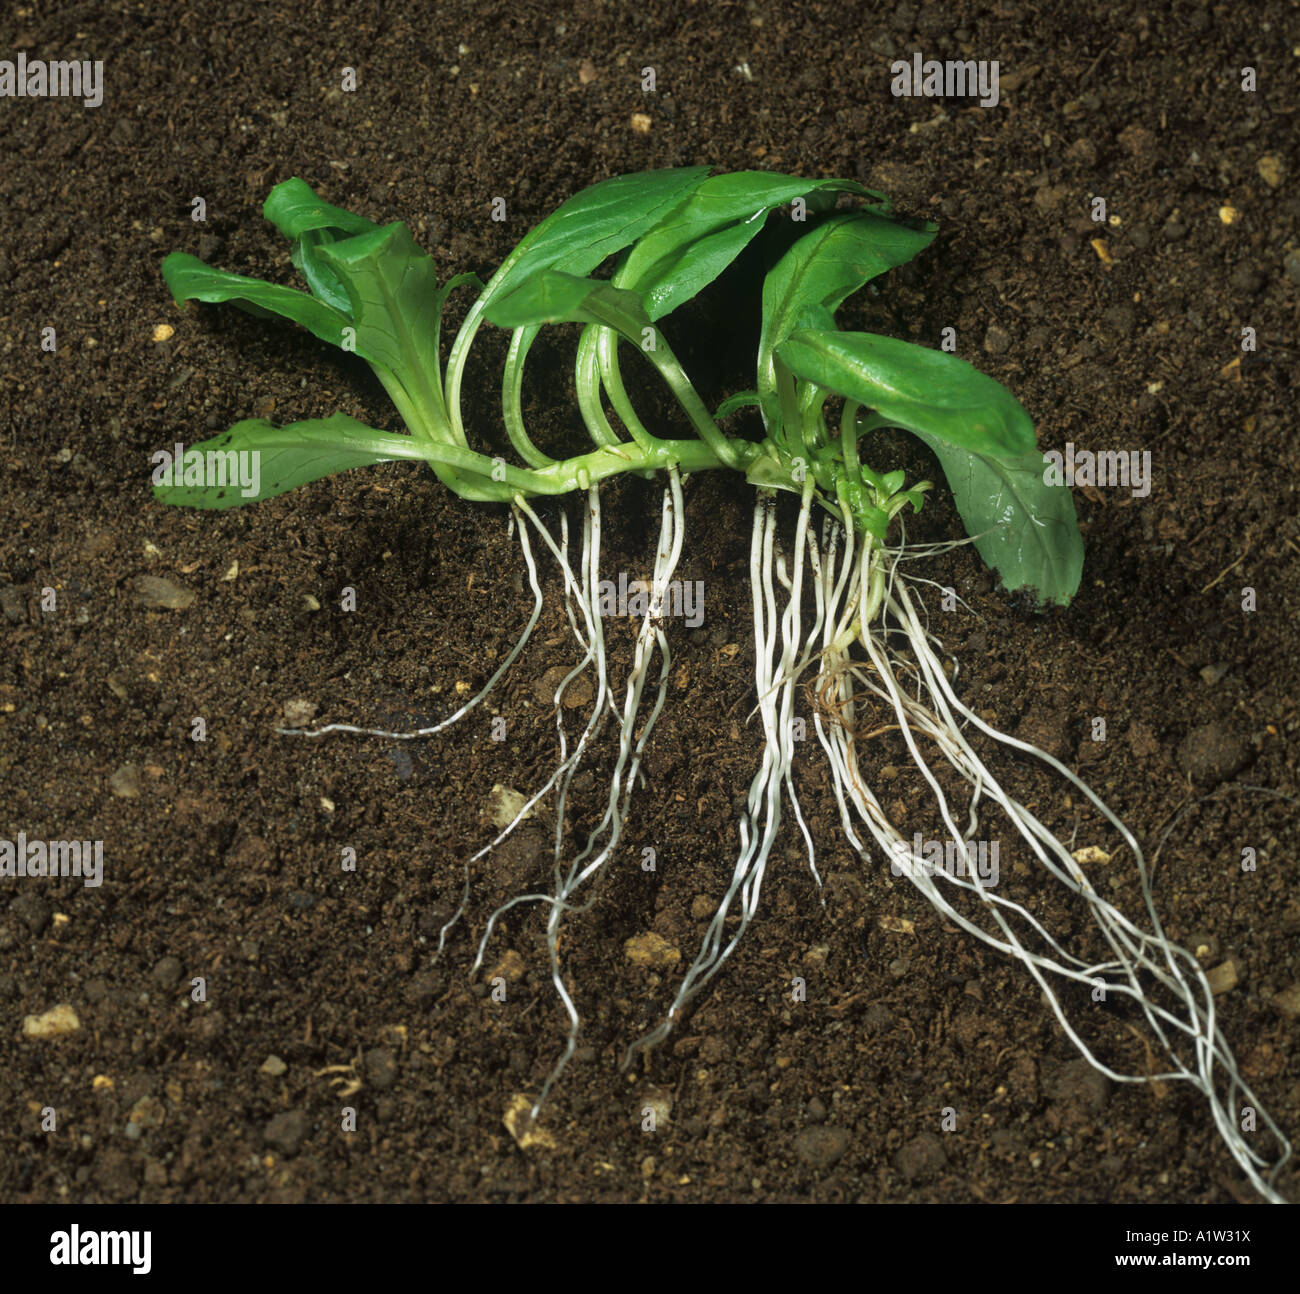 Fringed willowherb Epilobium ciliatum young plant showing creeping root system Stock Photo